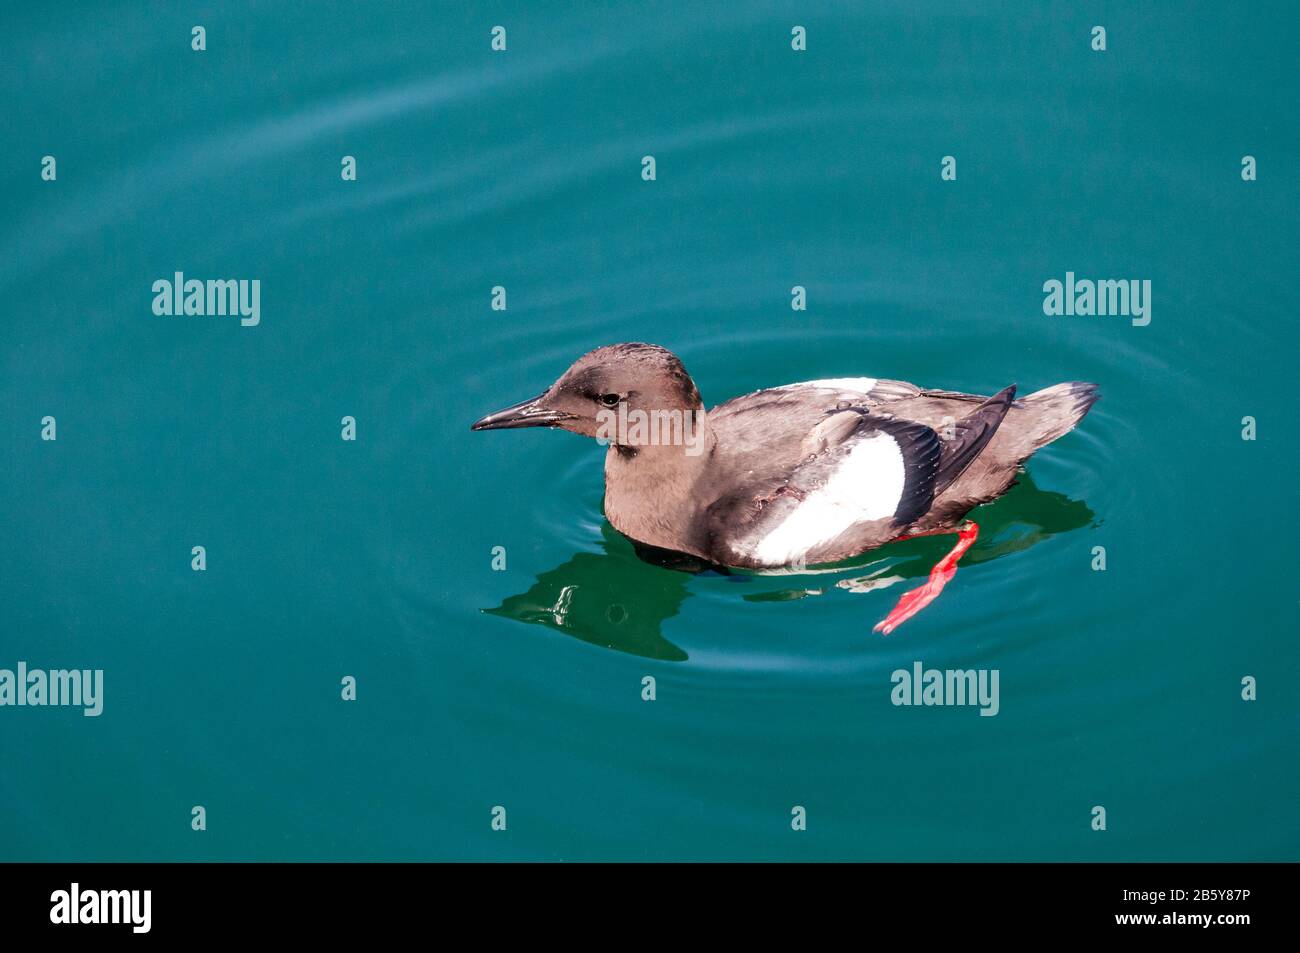 Black guillemot or Tystie, Cepphus grylle, swimming and showing red legs. Stock Photo